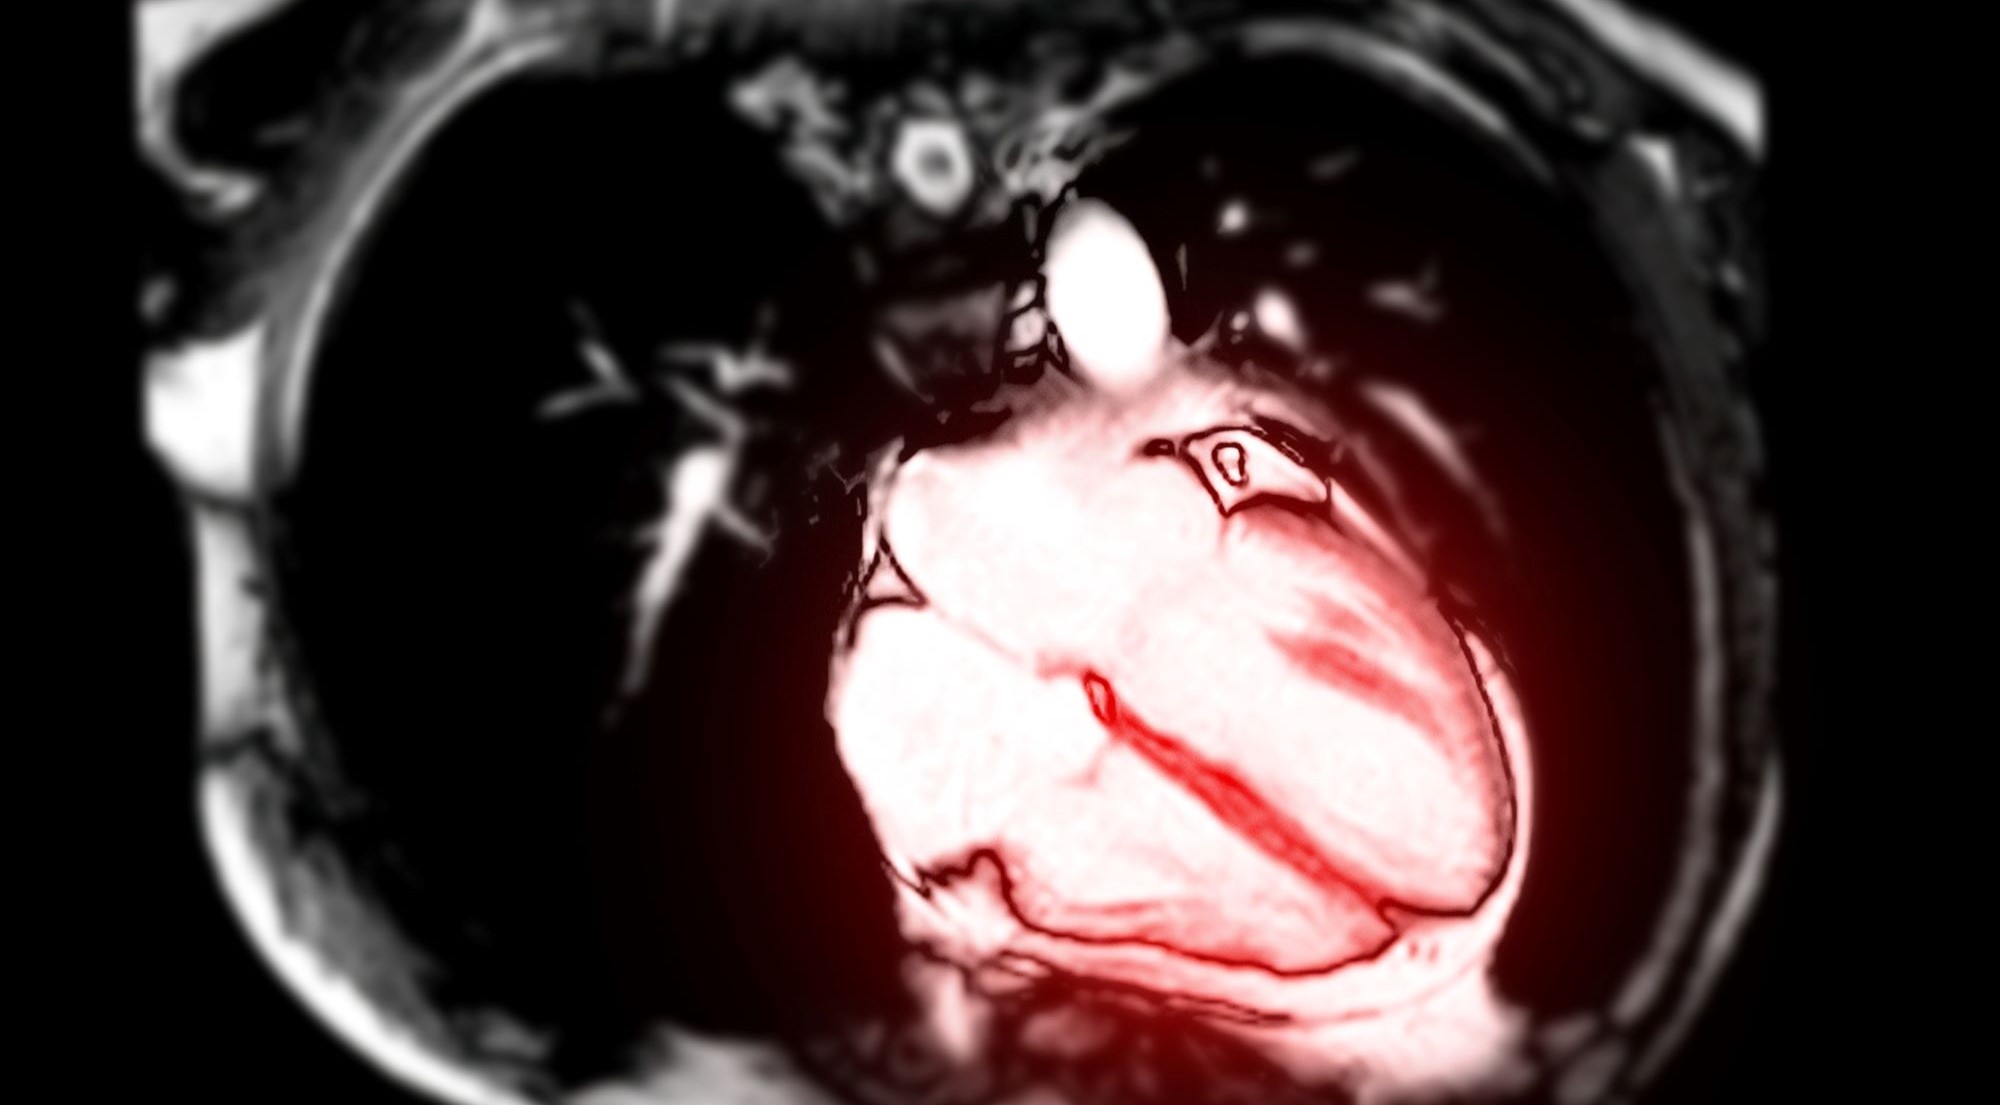 Myocarditis after COVID vaccines seen in MRI of heart